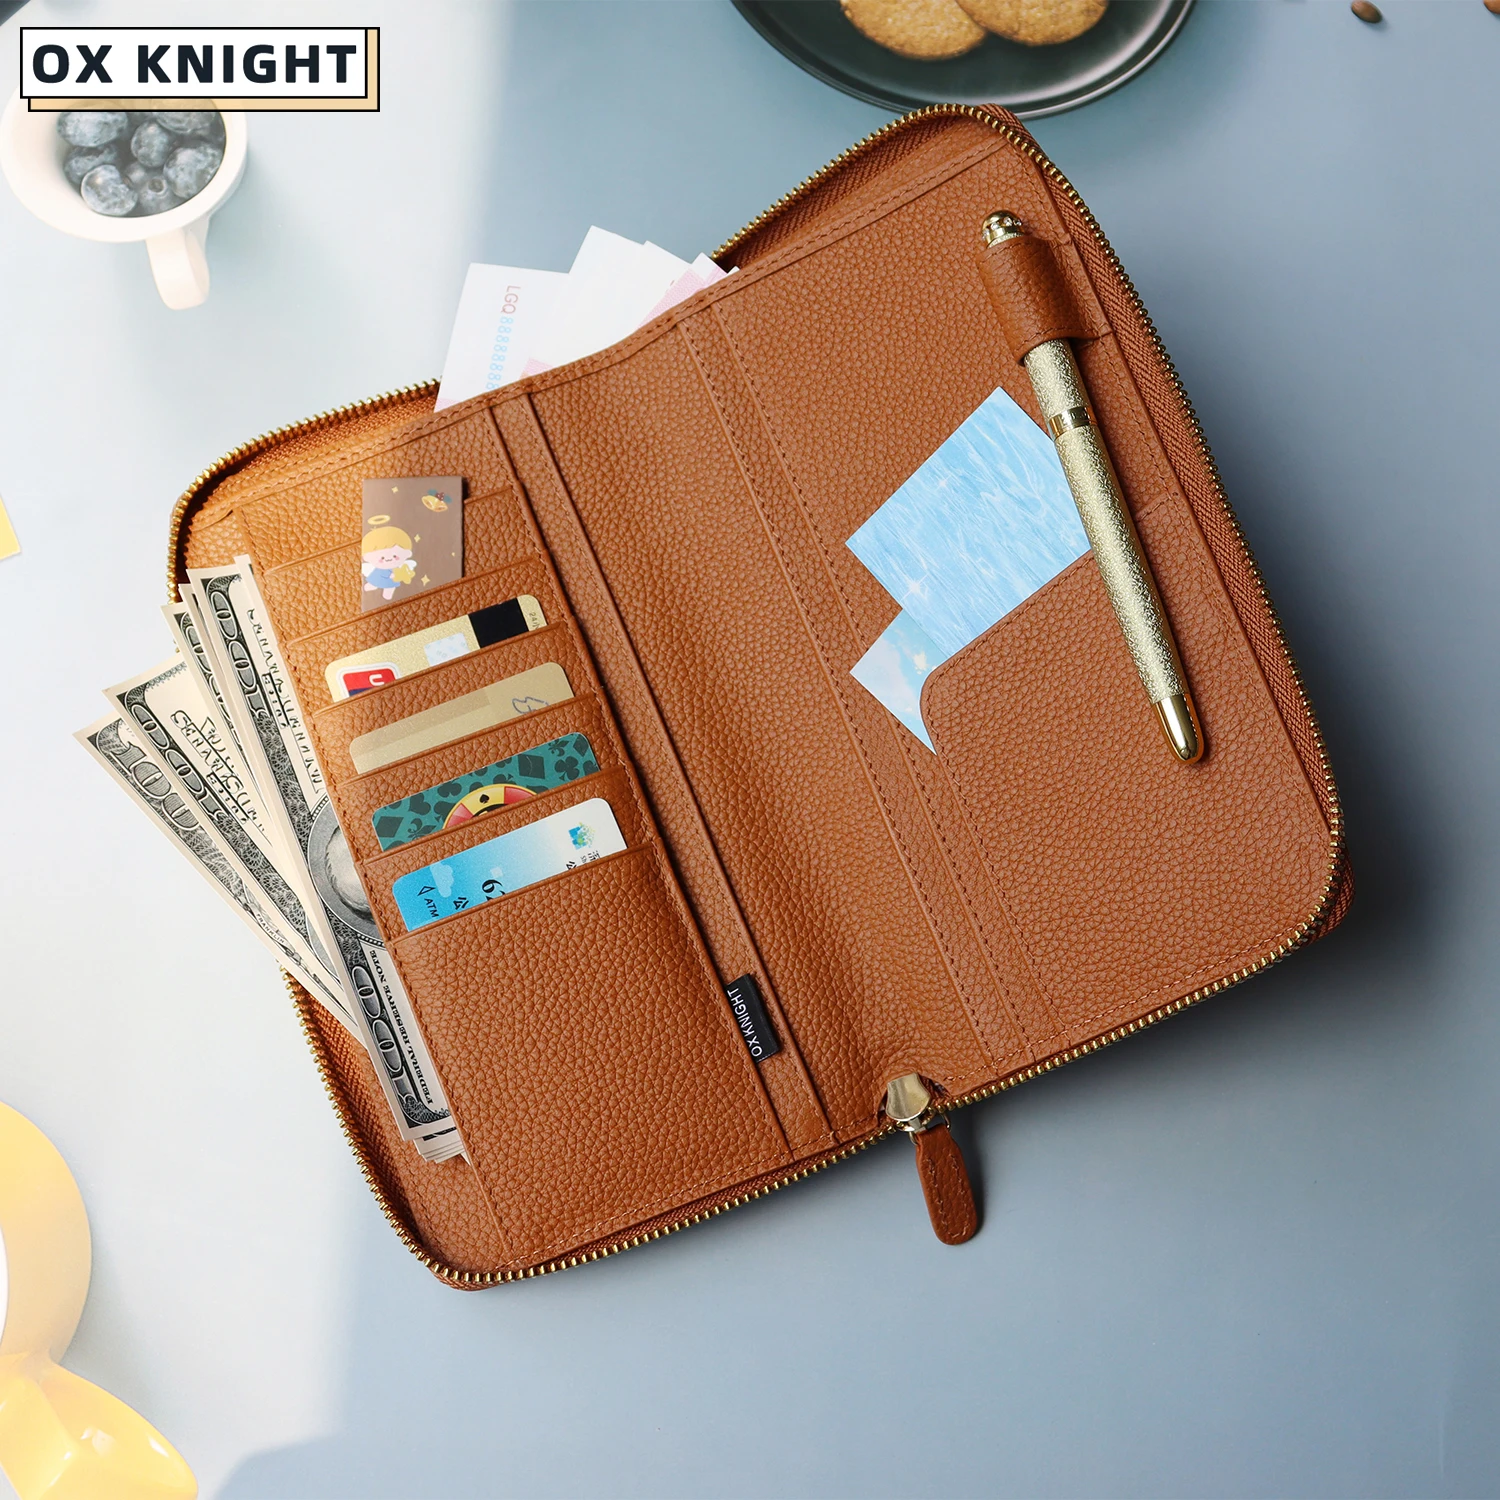 OX KNIGHT Genuine Zippered Weeks Cover Notebook Organizer Pebbled Grain Leather Planner Credit Card Holder Agenda Journal Diary